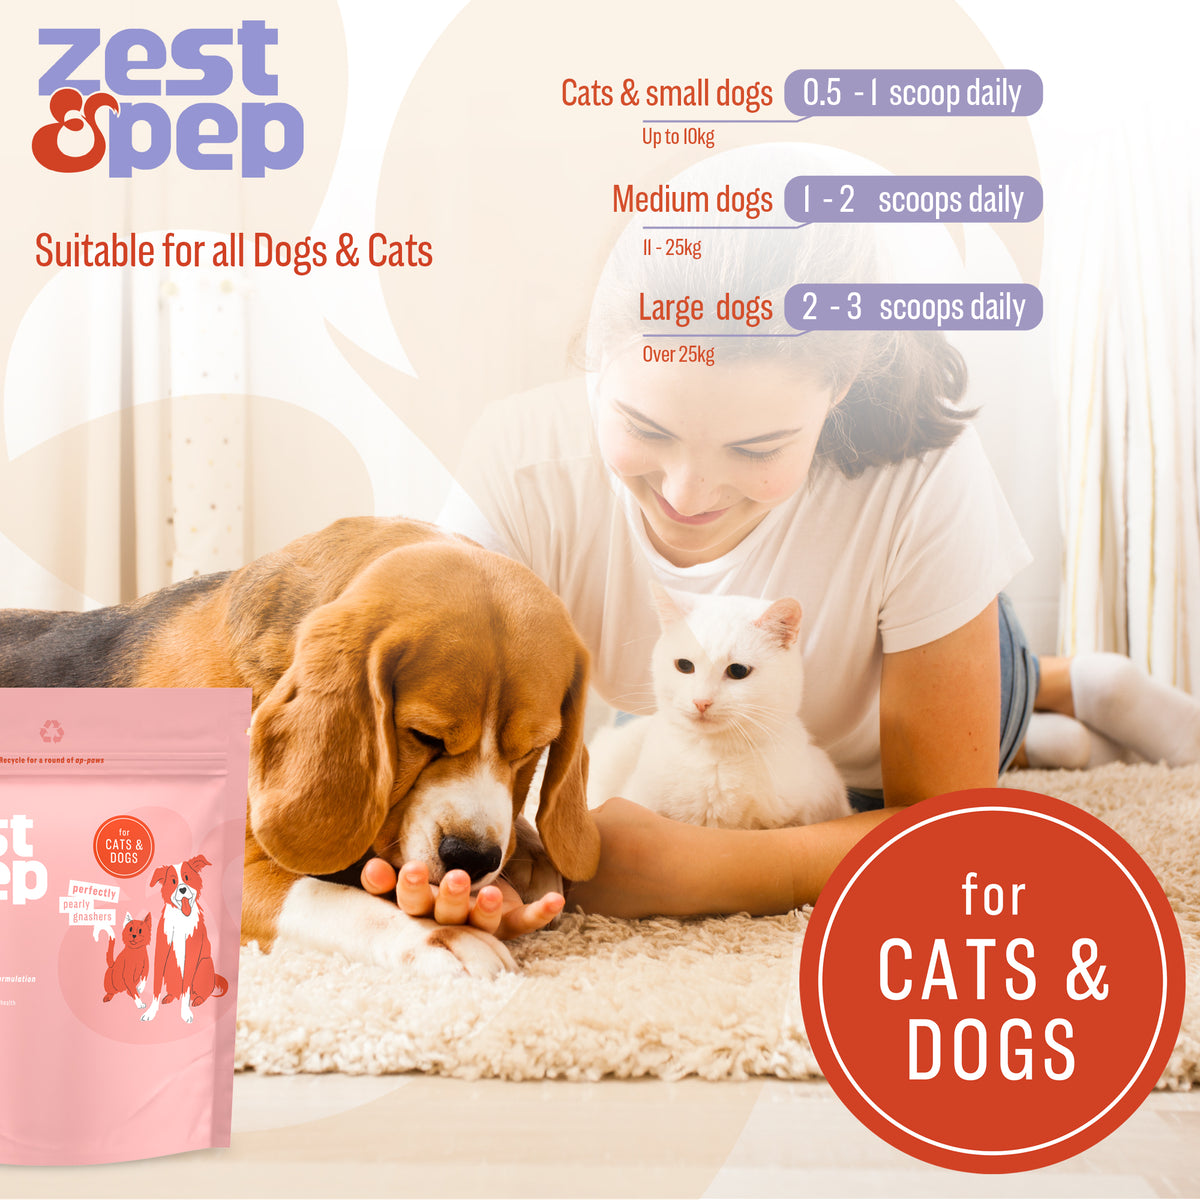 Dental+ Powder For Cats &amp; Dogs